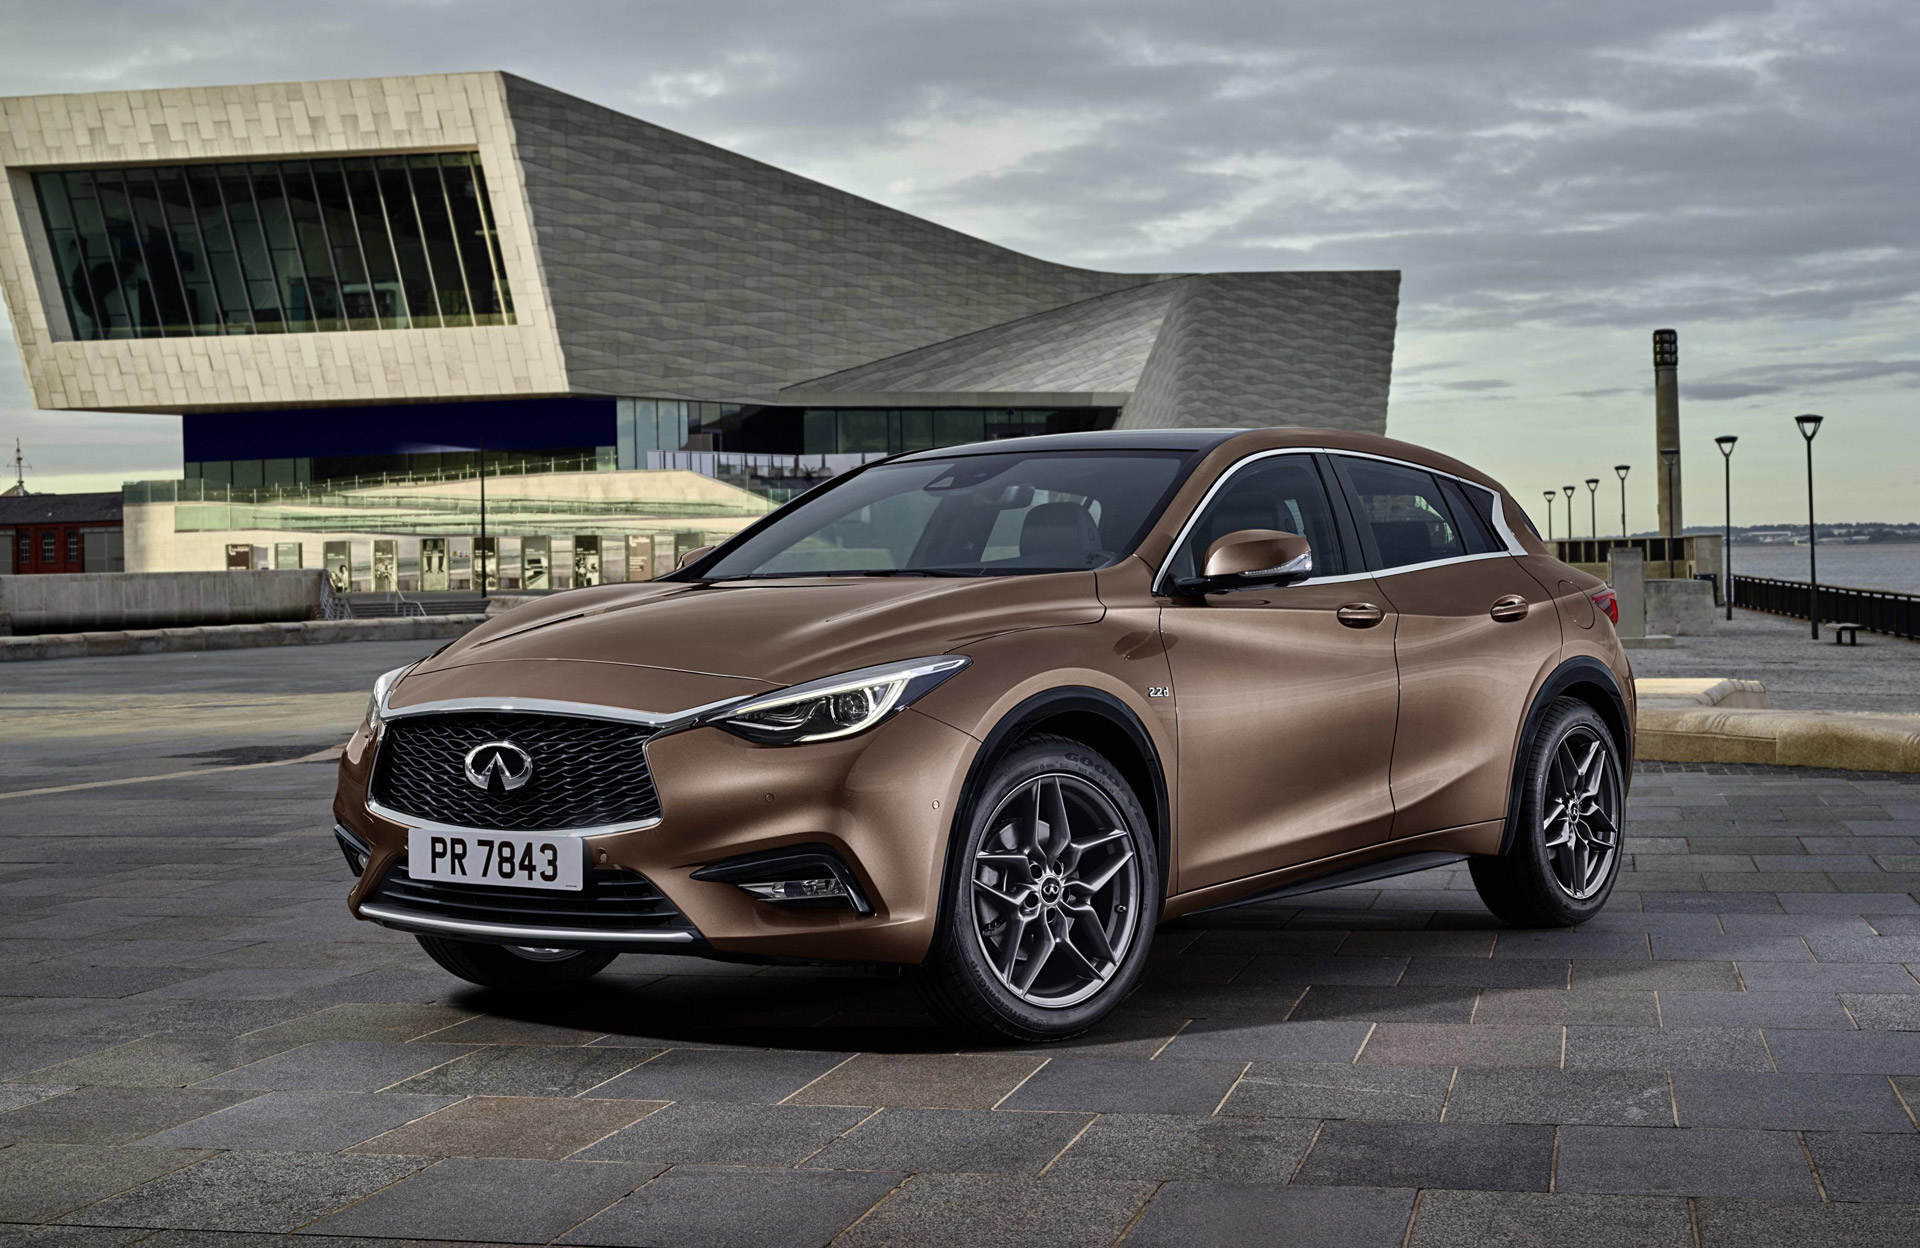 2017 Infiniti Q30 Video: 'Lust And Logic' In Compact Hatchback For  Frankfurt Show (UPDATED)